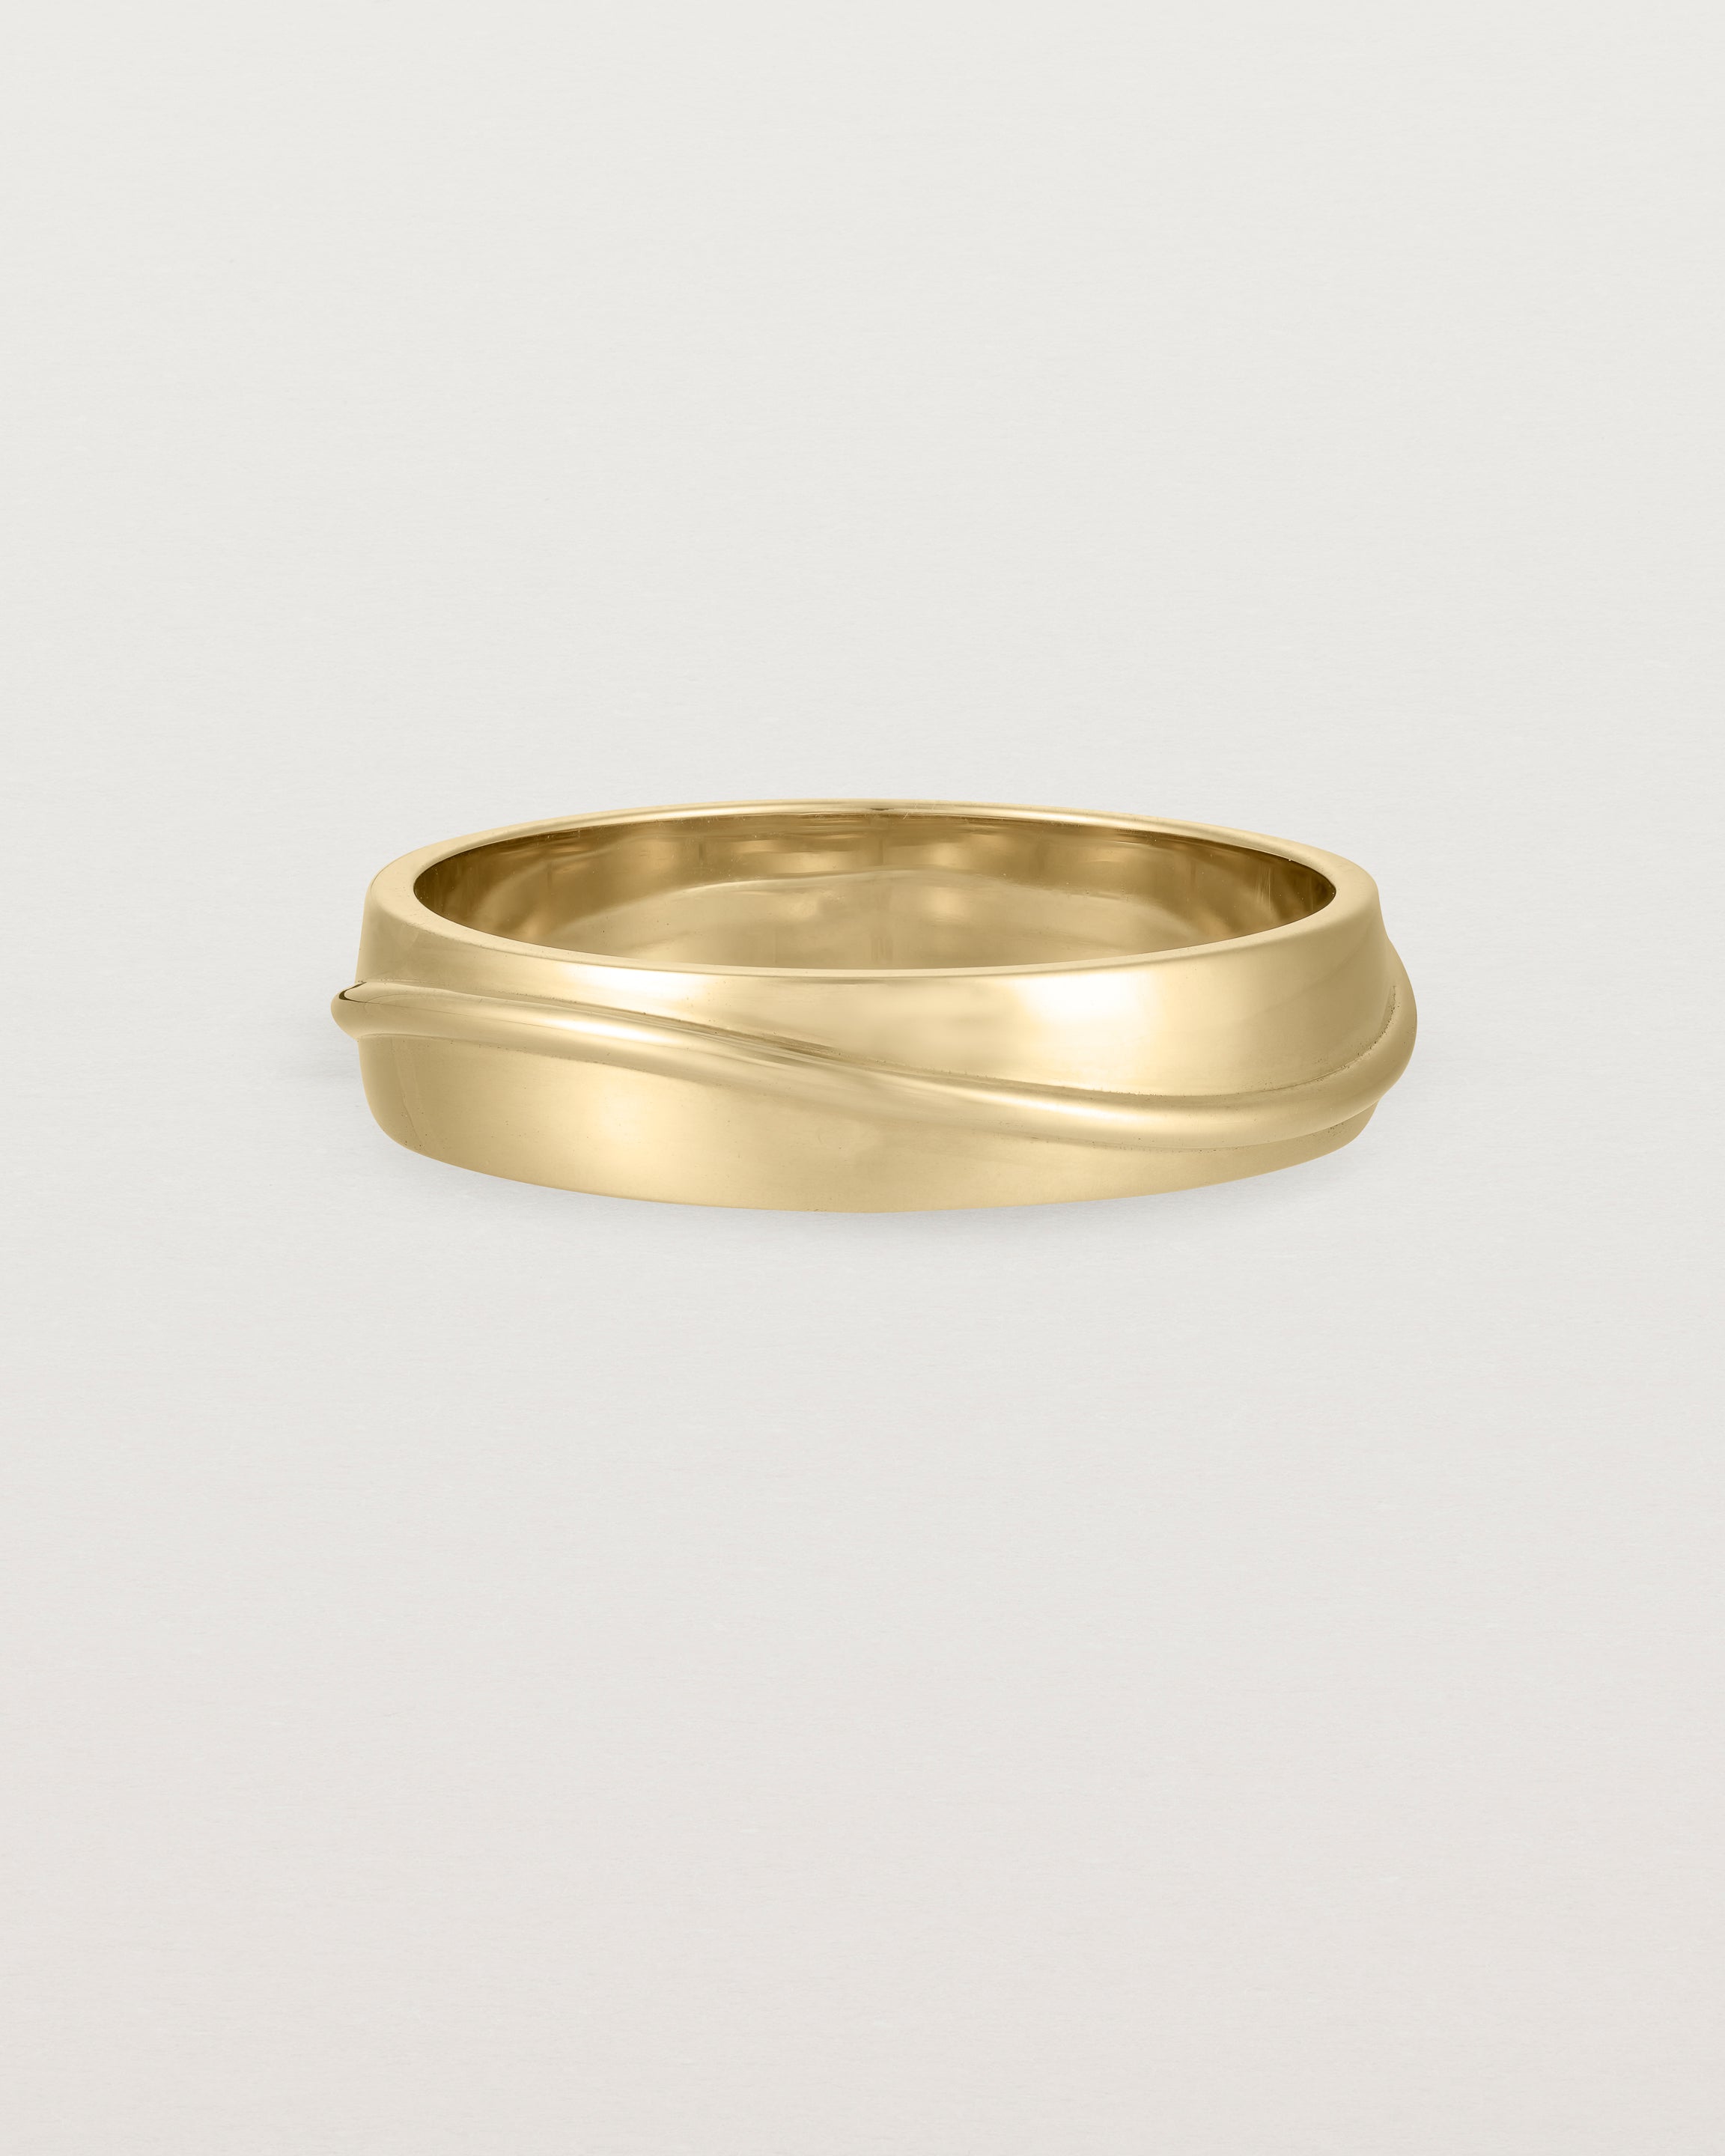 Front view of the Surge Wedding Ring | 5mm | Yellow Gold.